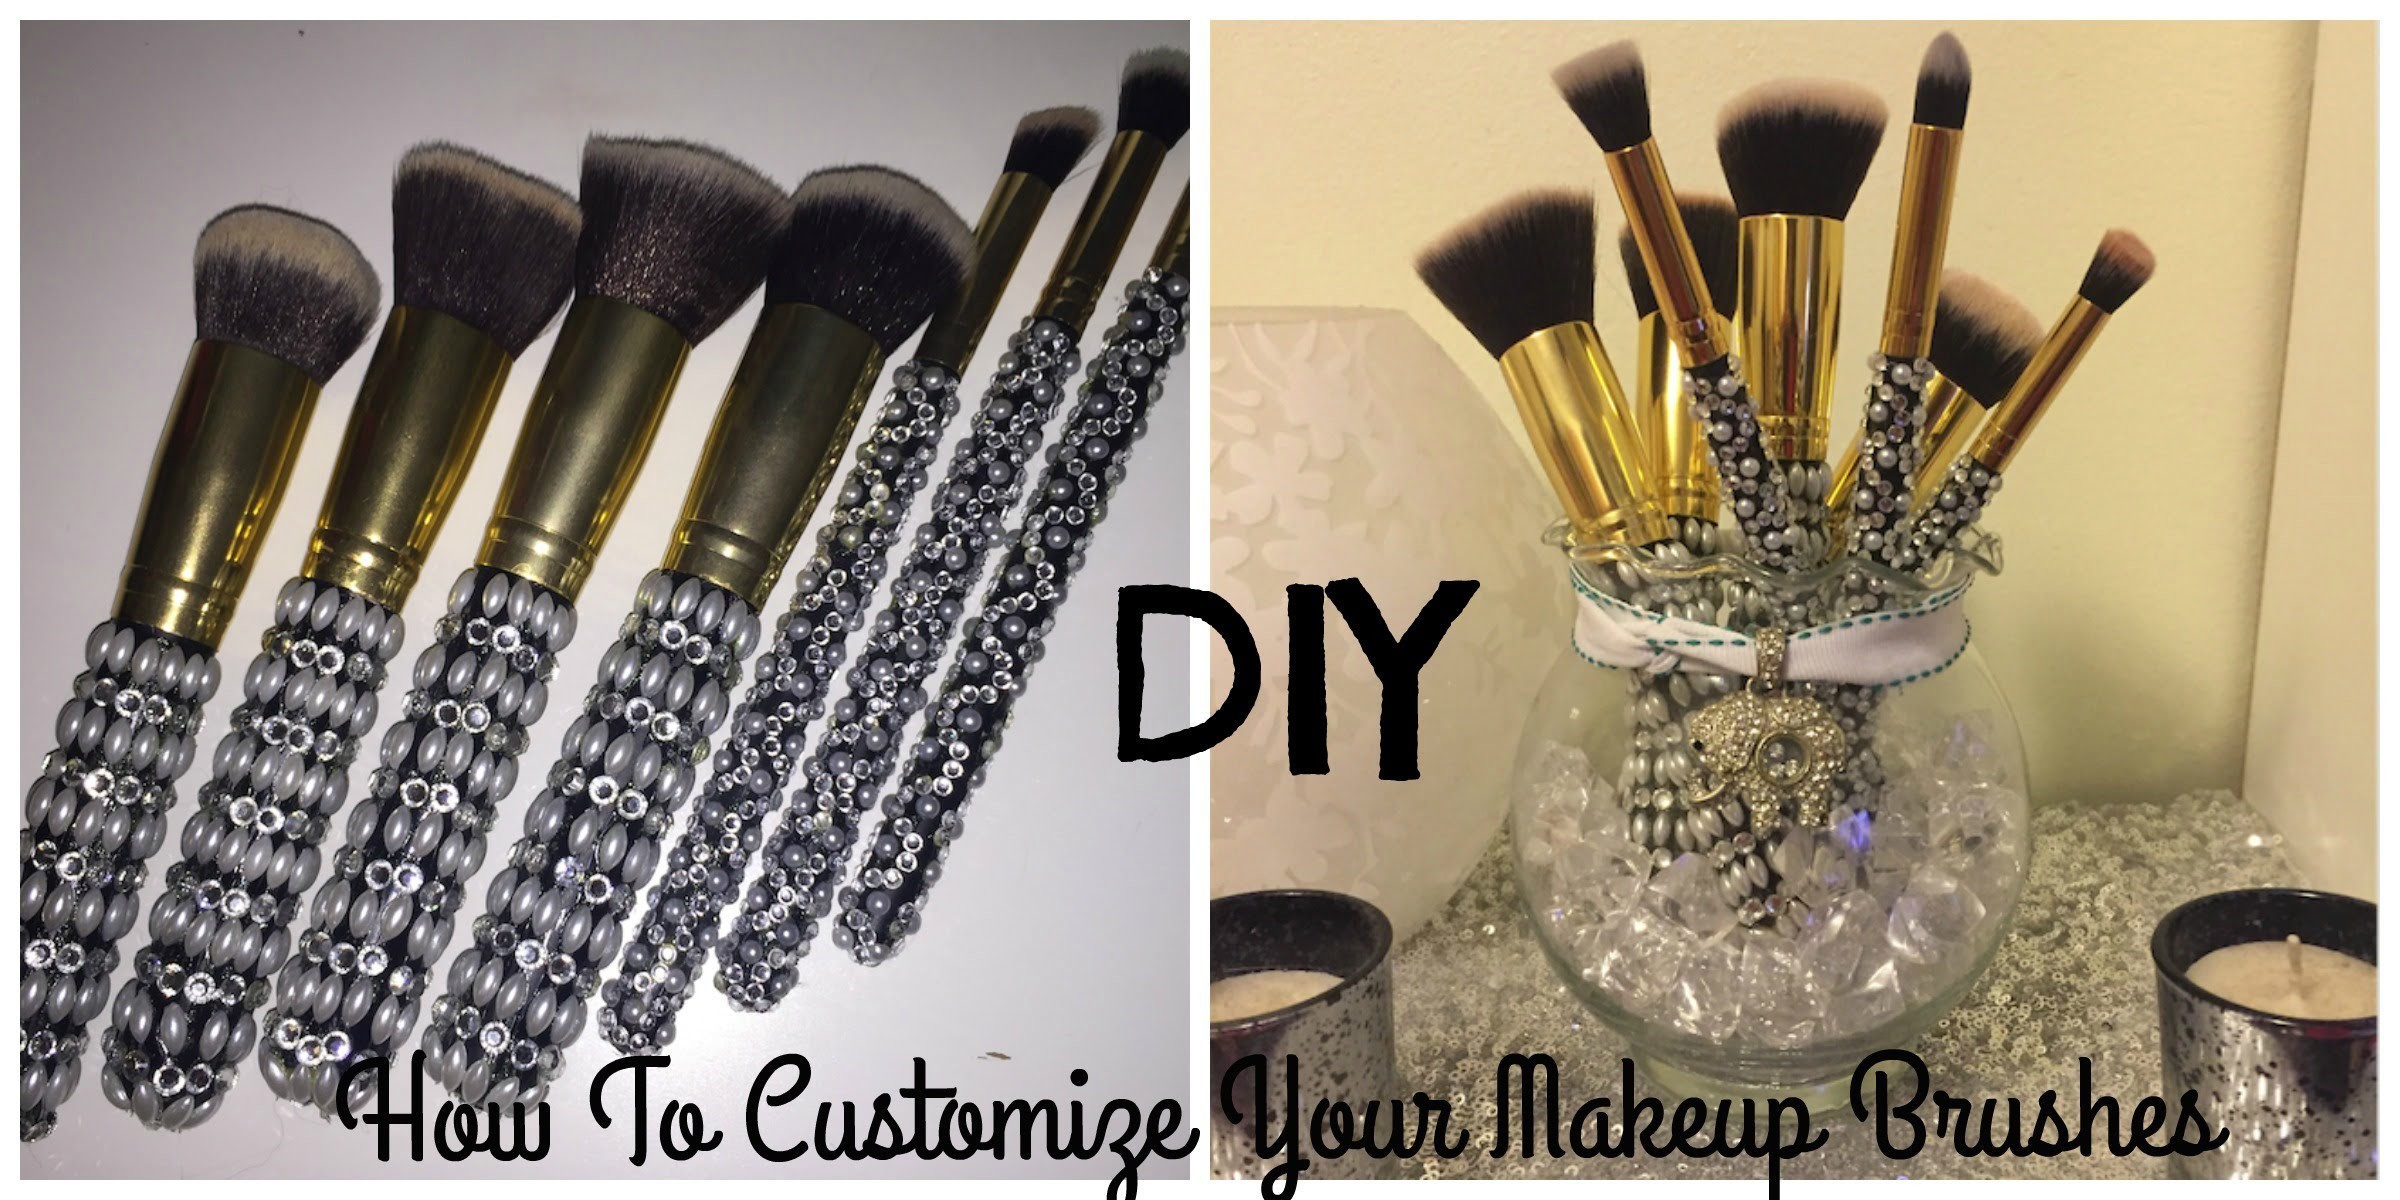 DIY; How to Customize your Brushes